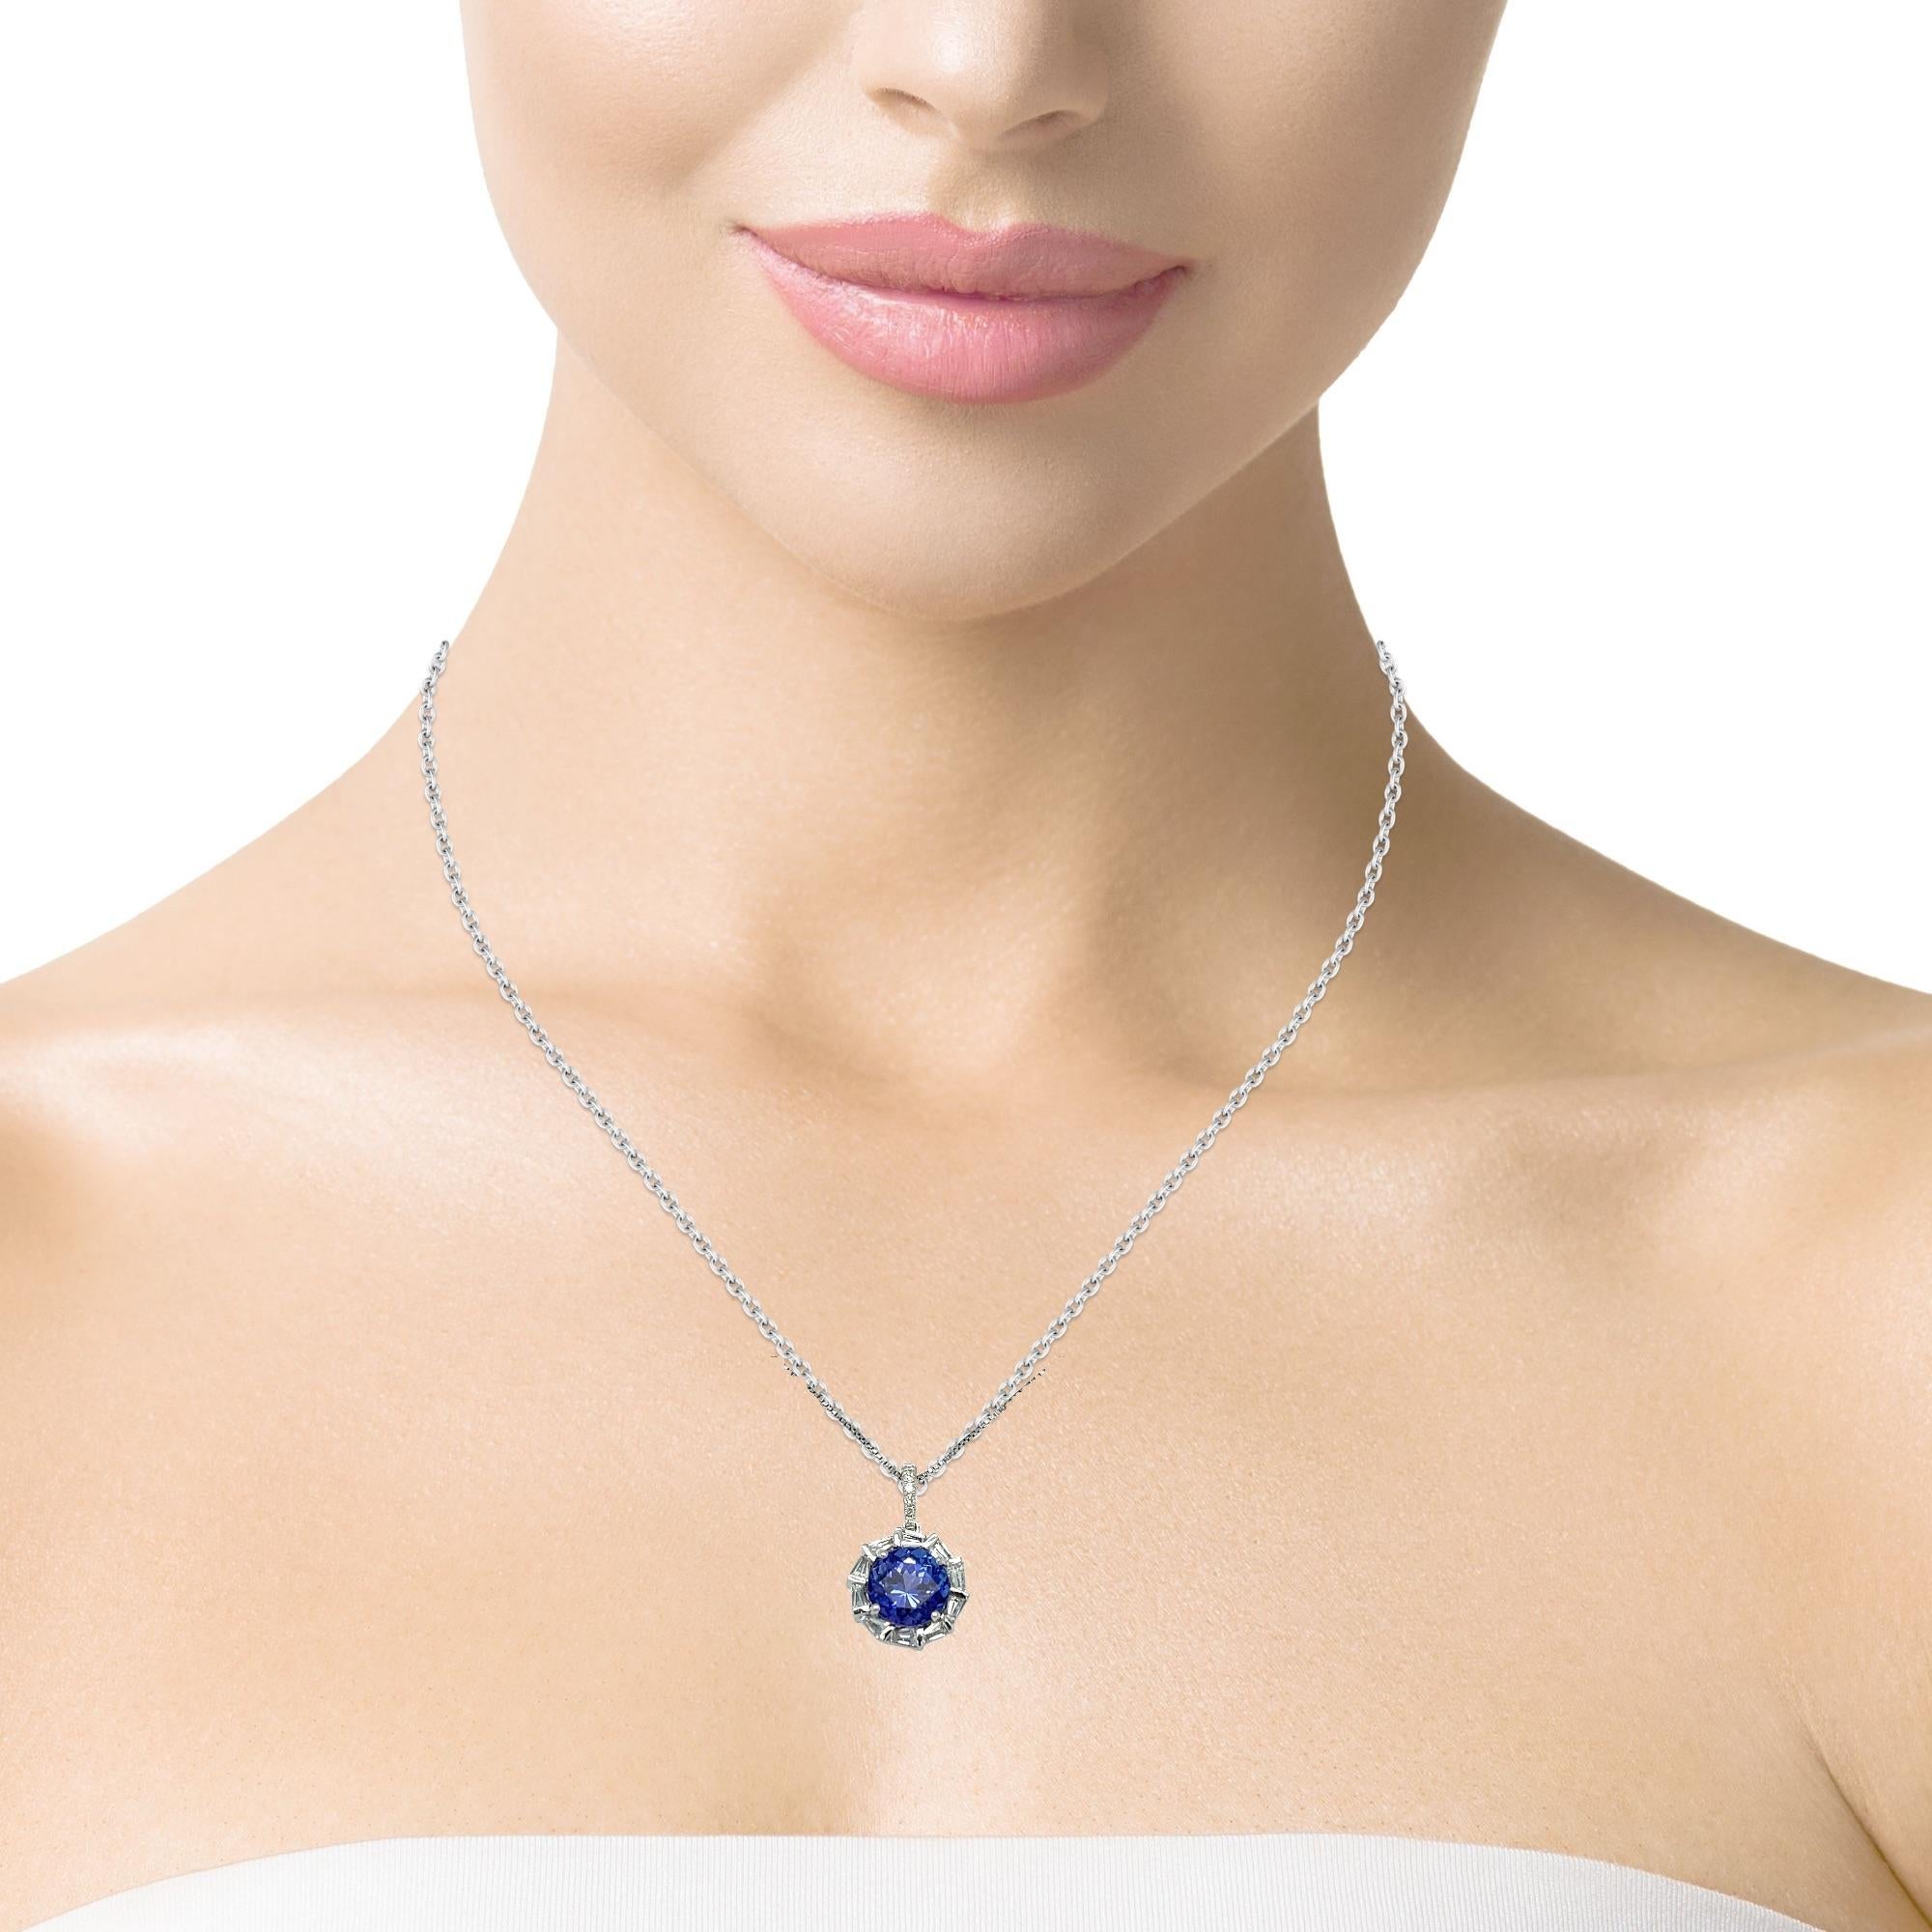 This stunning solitaire round AAA quality Tanzanite pendant is surrounded by top quality shimmering tapered baguette diamonds. 14K white gold chain included. Necklace comes in a beautiful box ready for the perfect gift!

18KW:          1.60 gms
Tanz